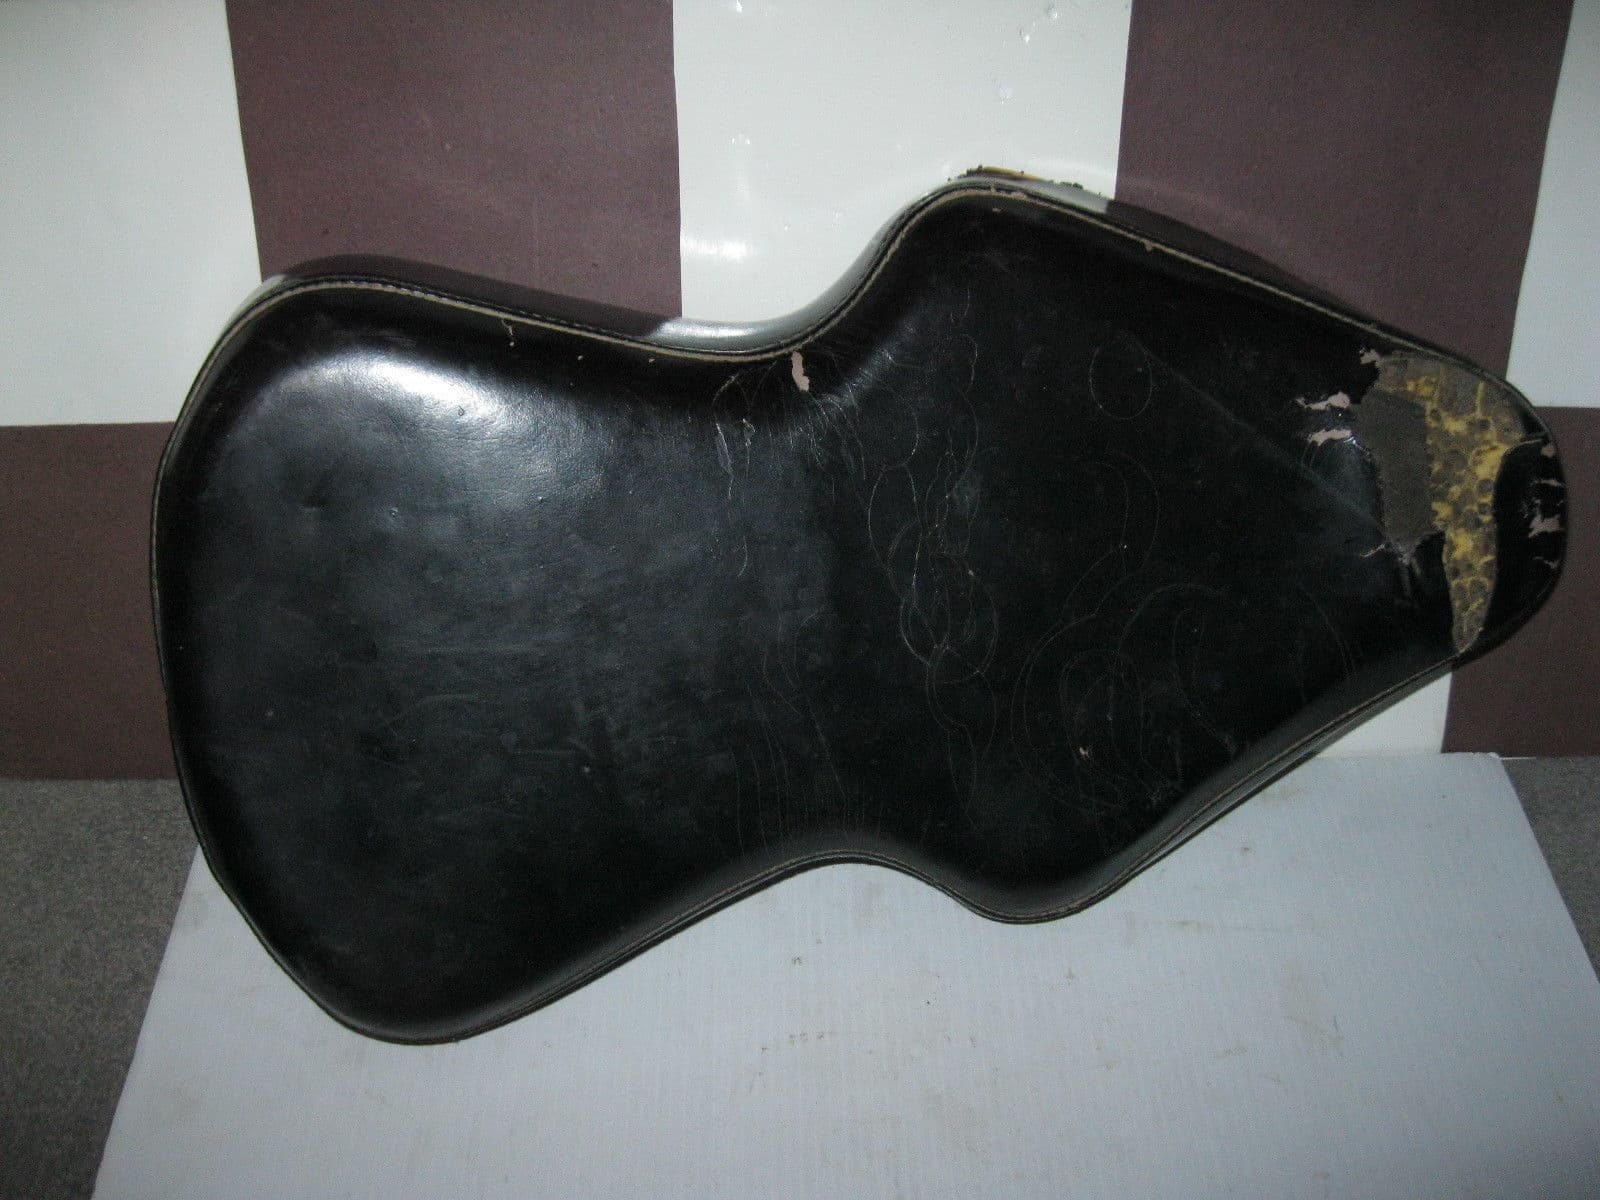 28f7521 Sears Allstate 175 and 250 Bates Seat